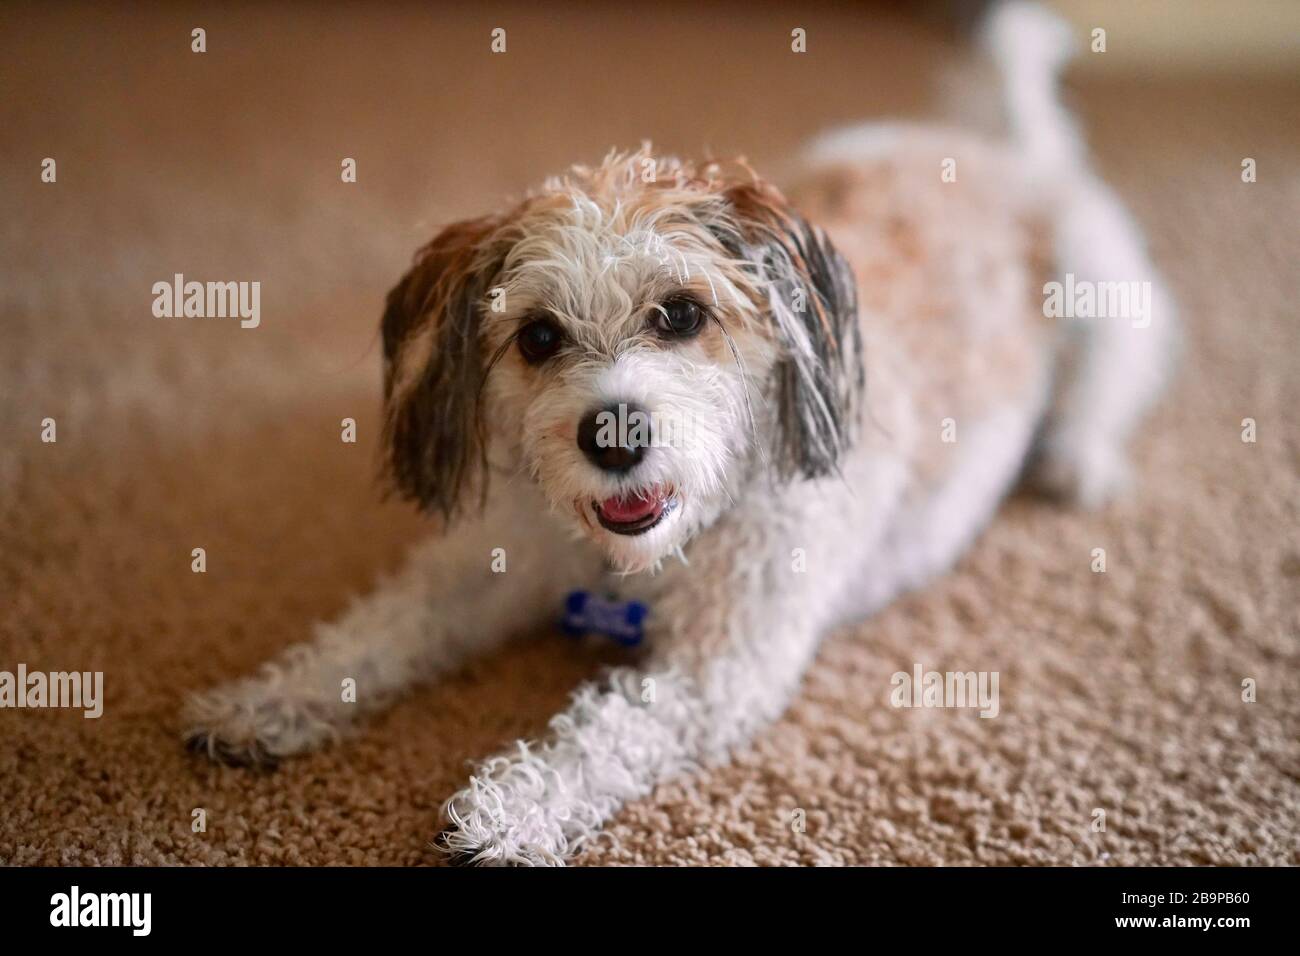 A dog poses for a photo after getting a bath. Stock Photo